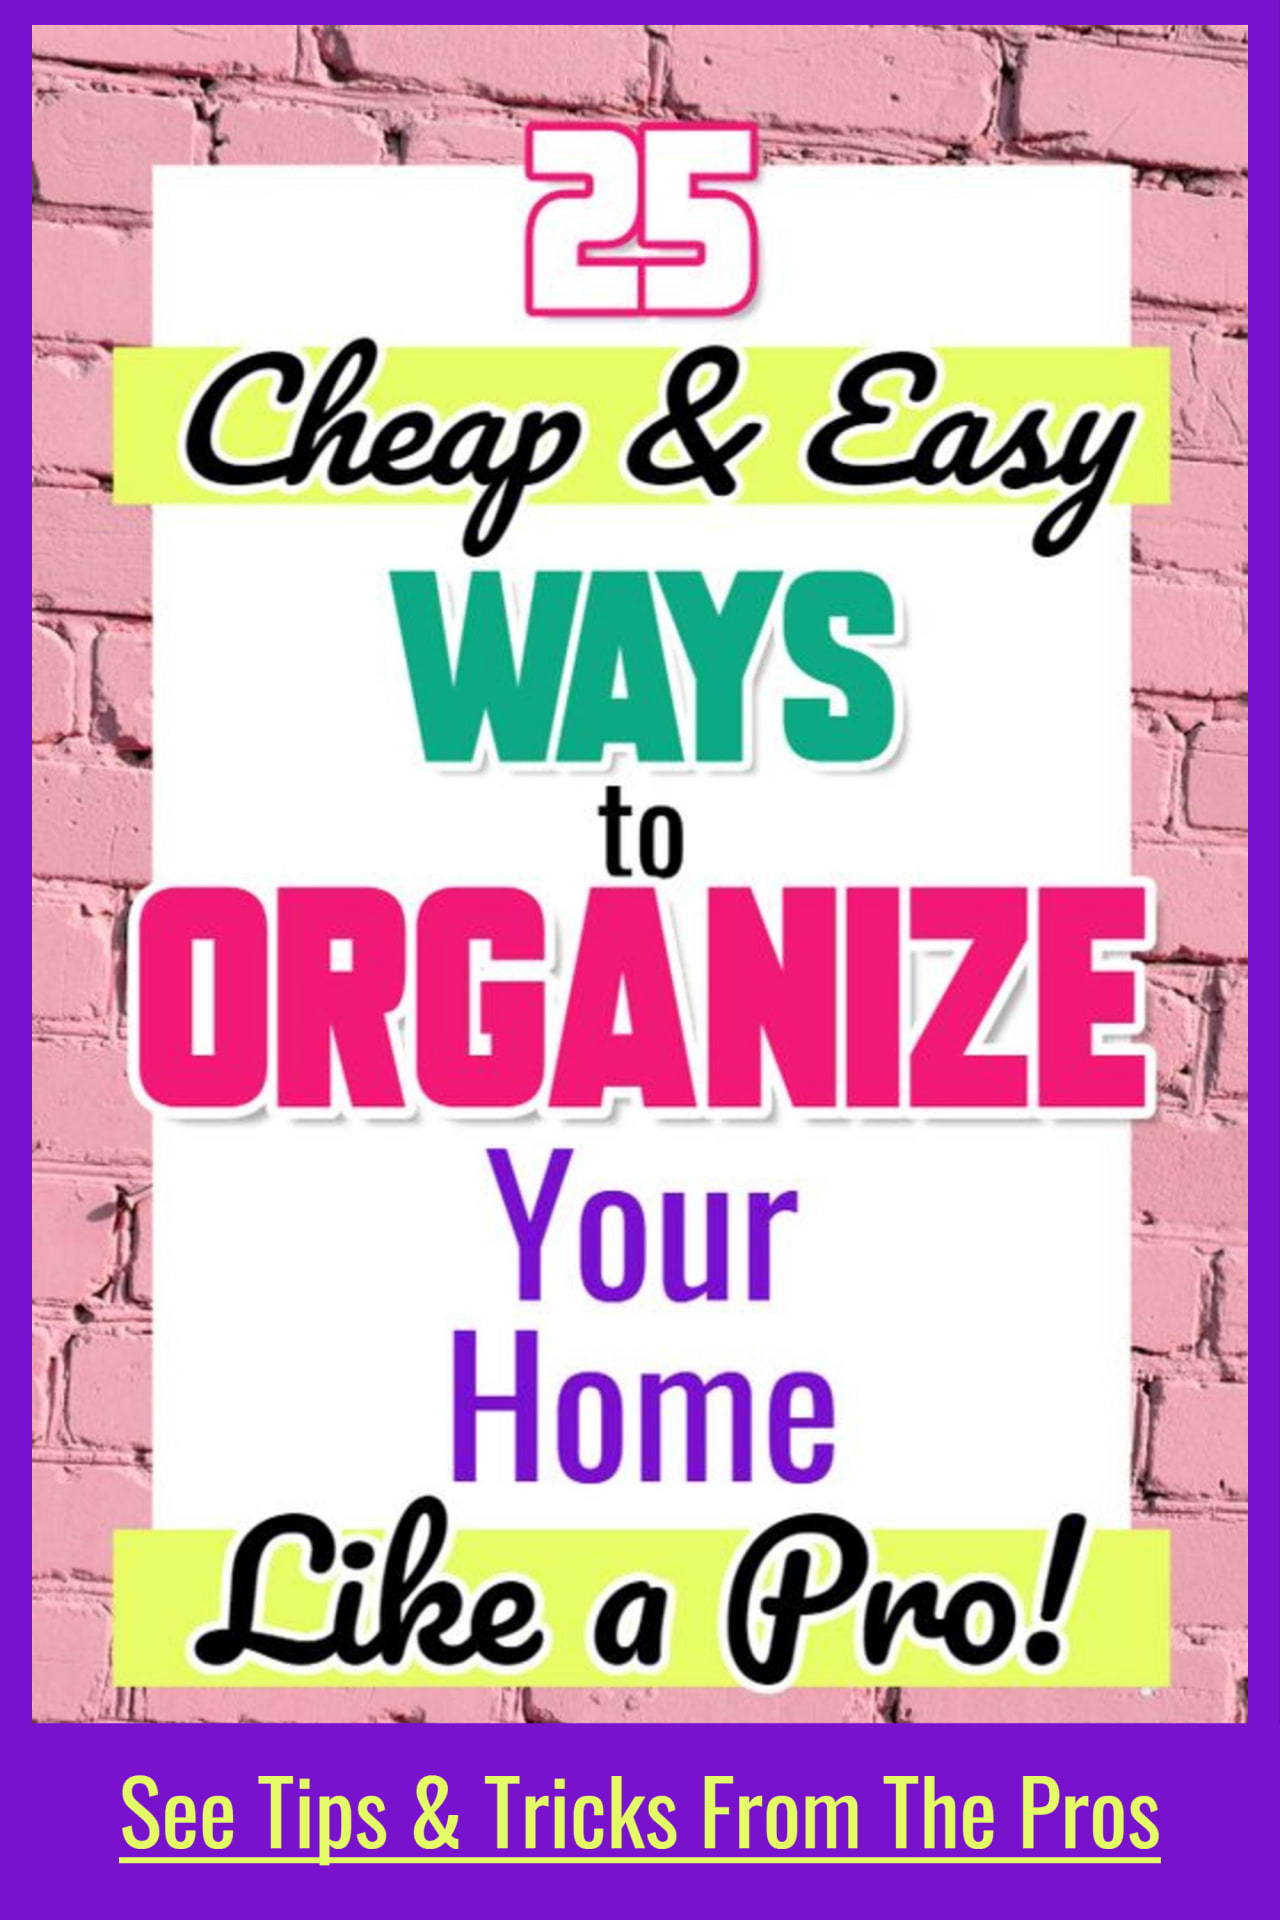 Cleaning tips and tricks from professional organizers to help you declutter and organize your home on a budget even if feeling overwhelmed with no motivation